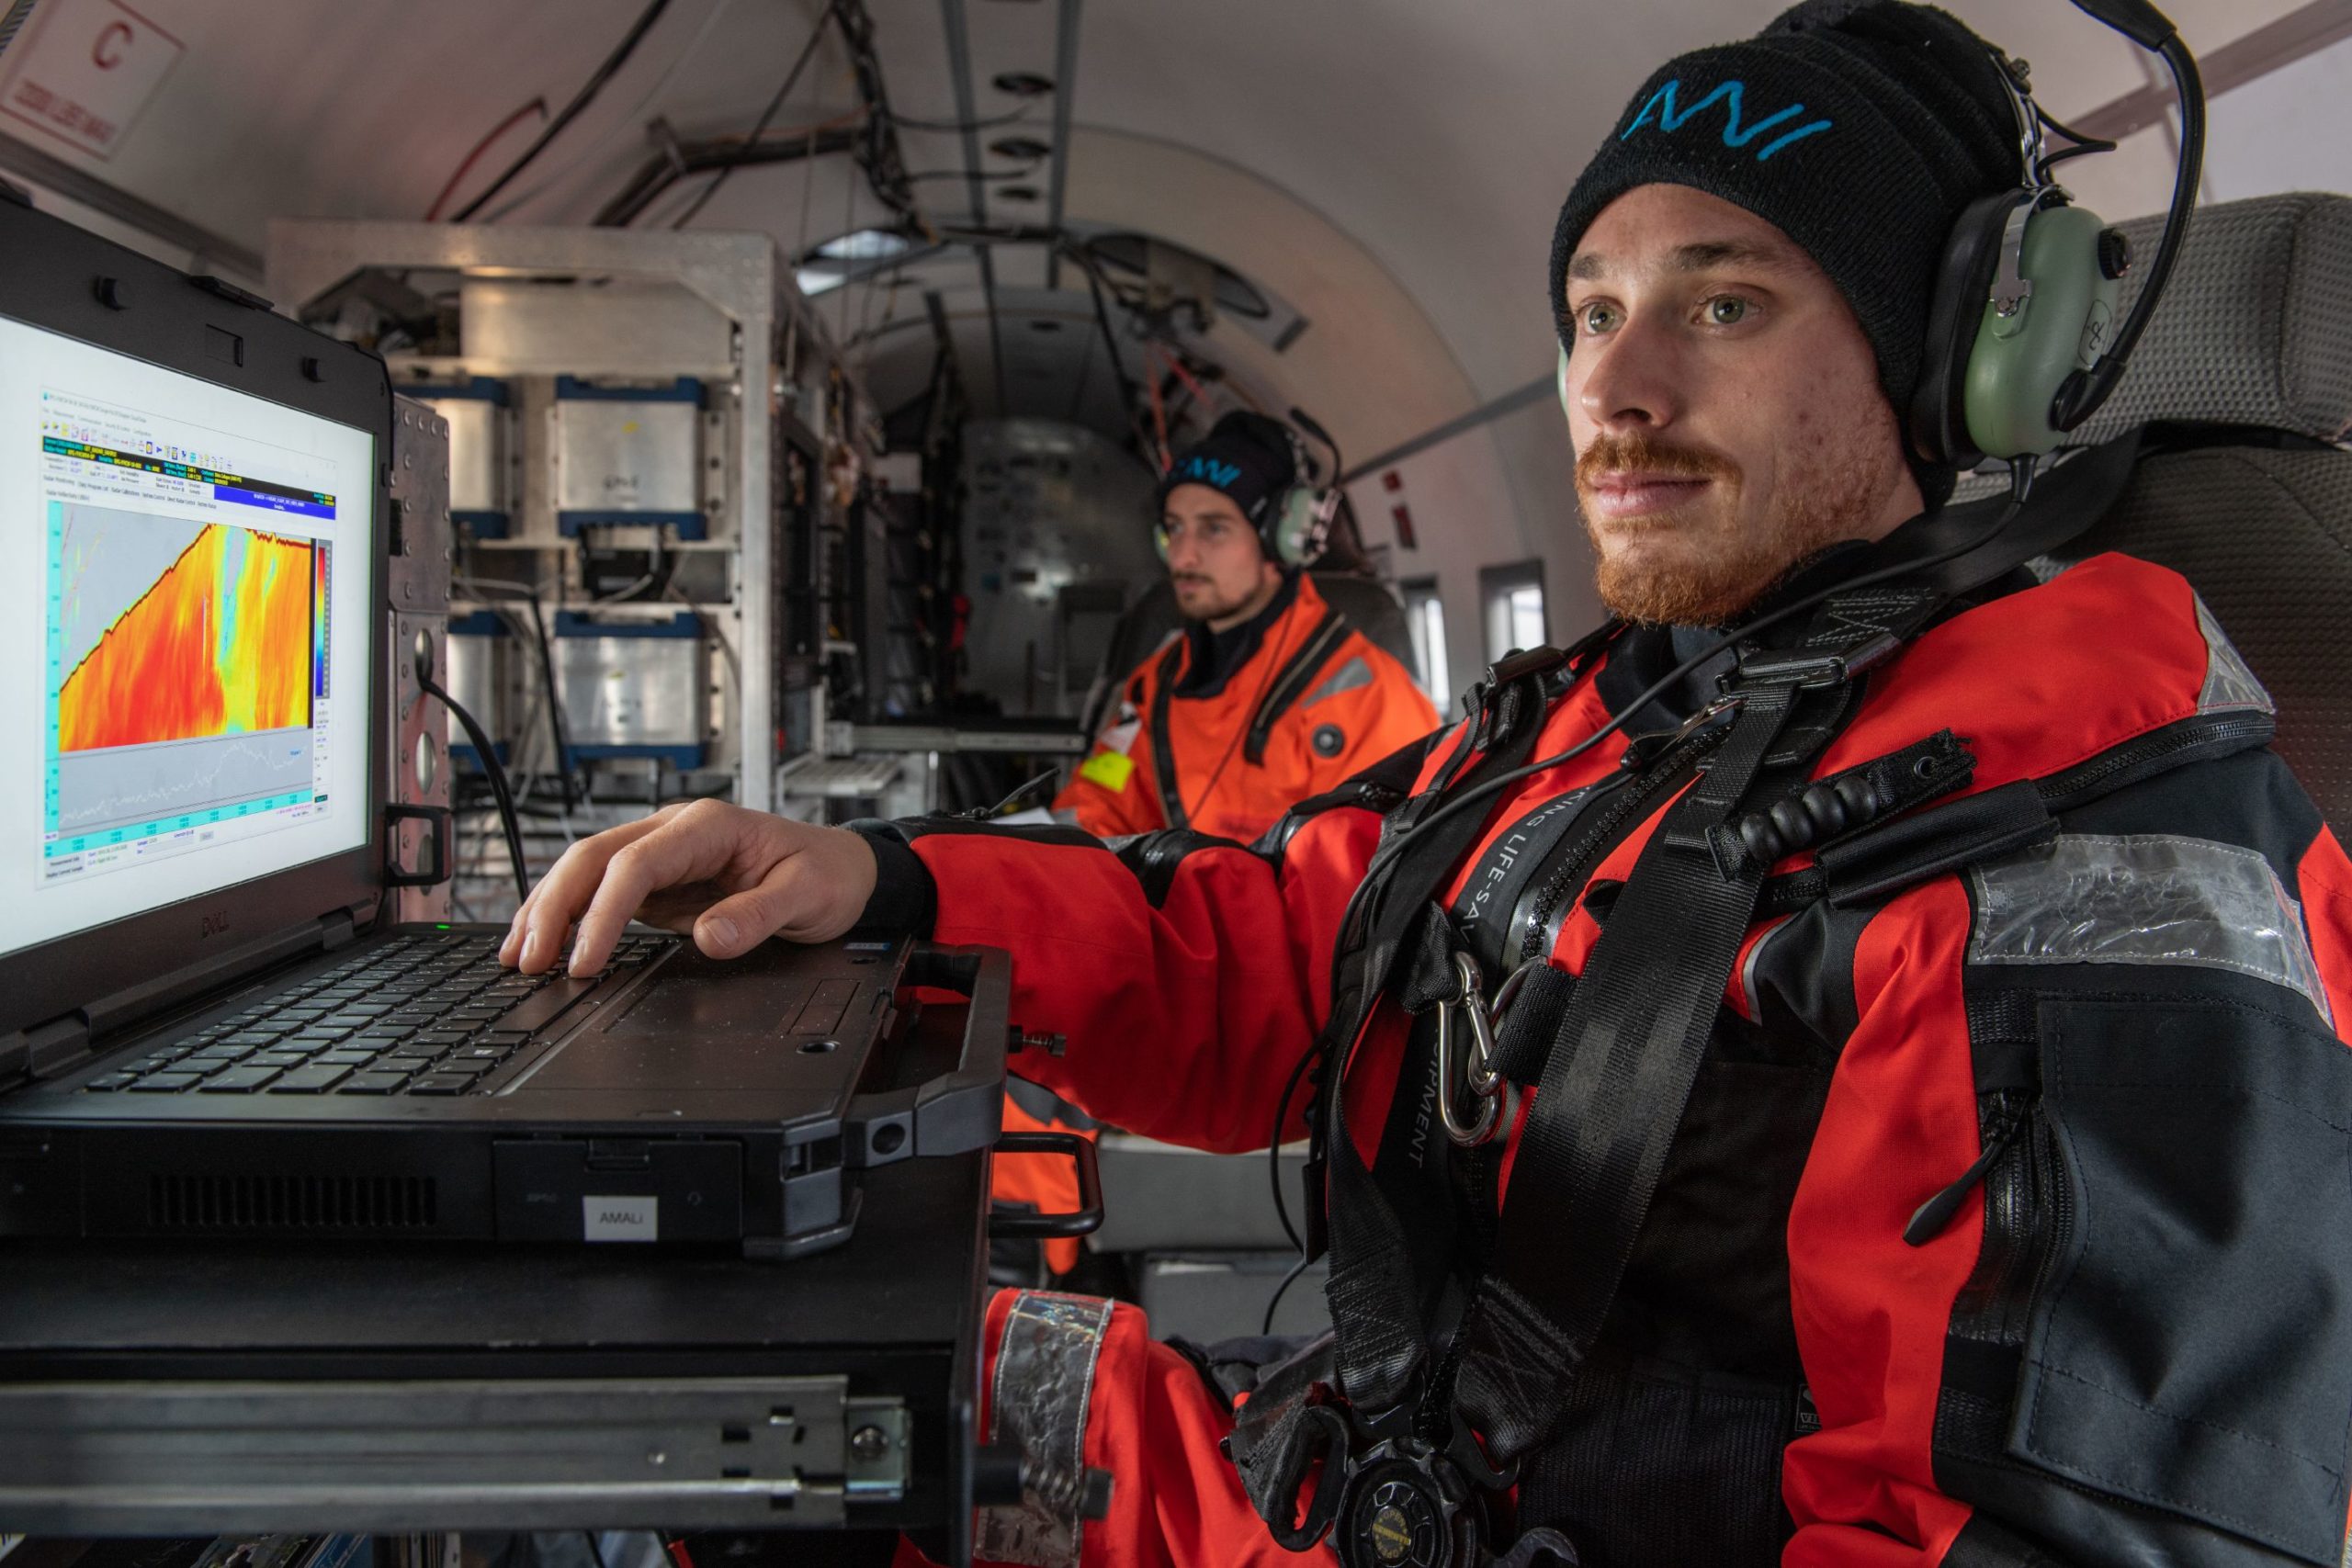 Portarit of Manuel Moser (r) from DLR and Hannes Probst (l) from AWI in Polar 5 research aircraft.